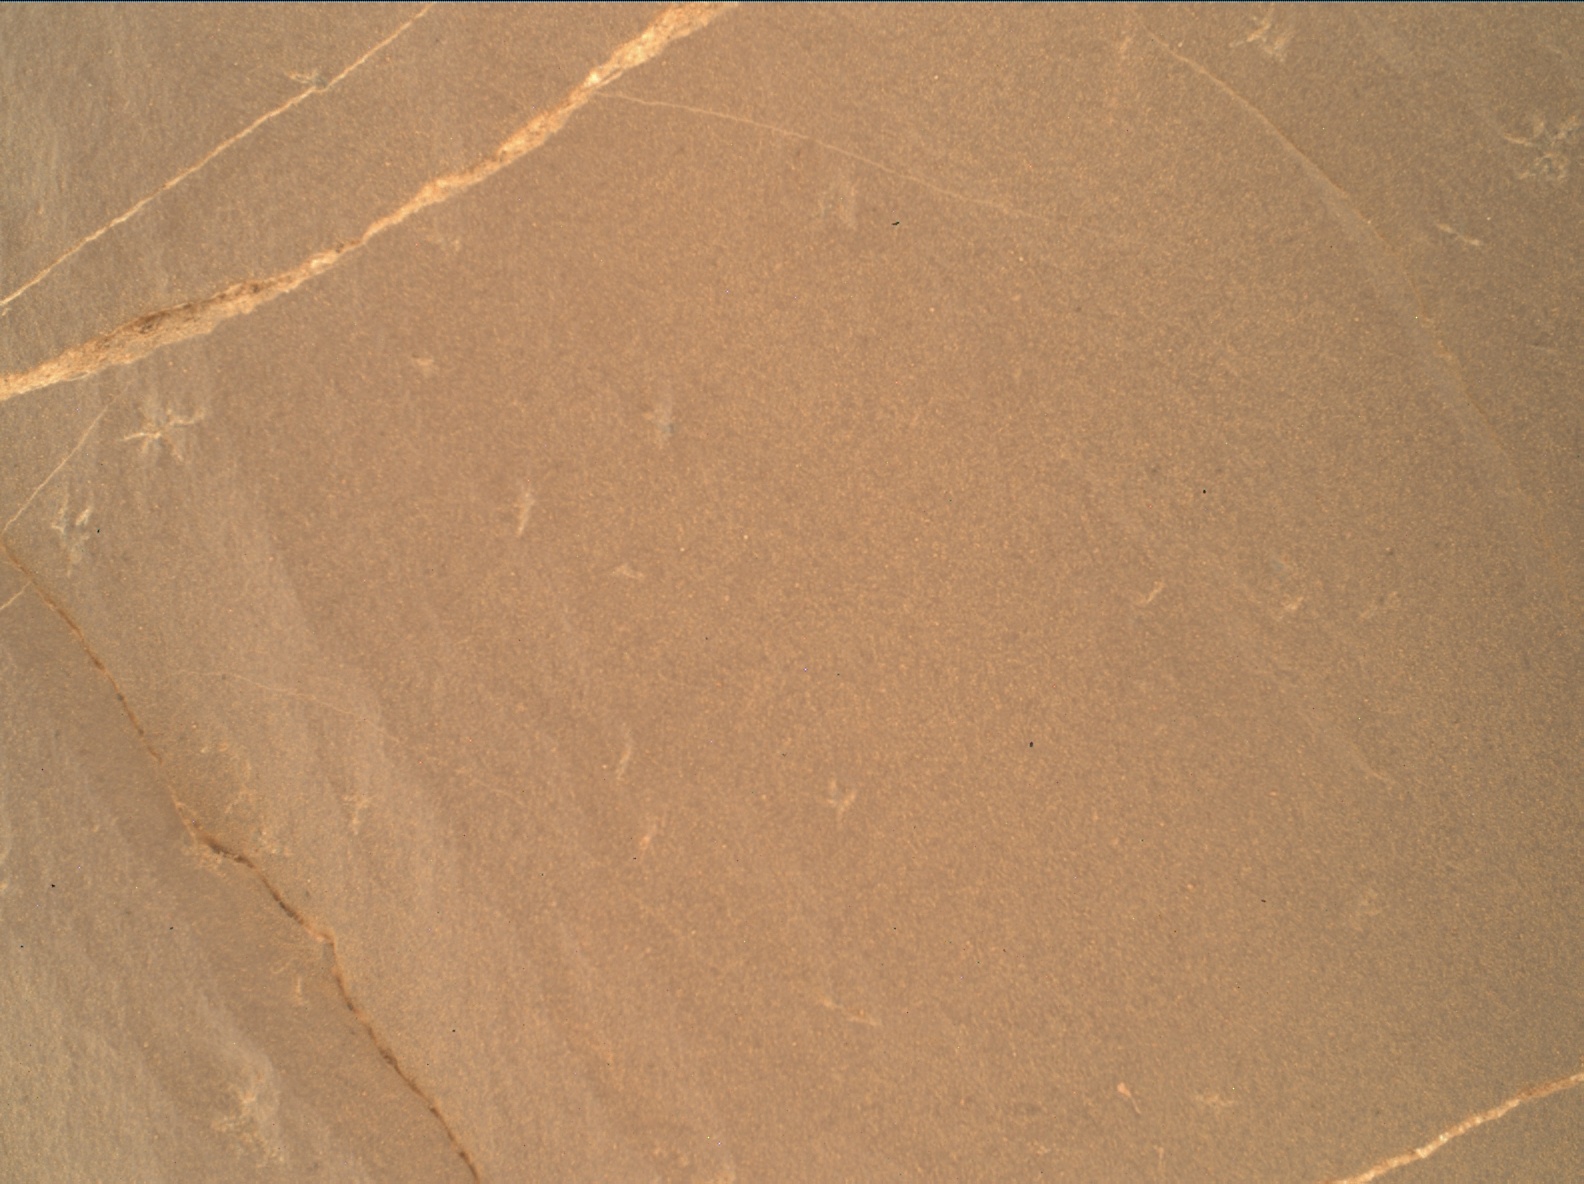 Nasa's Mars rover Curiosity acquired this image using its Mars Hand Lens Imager (MAHLI) on Sol 1991